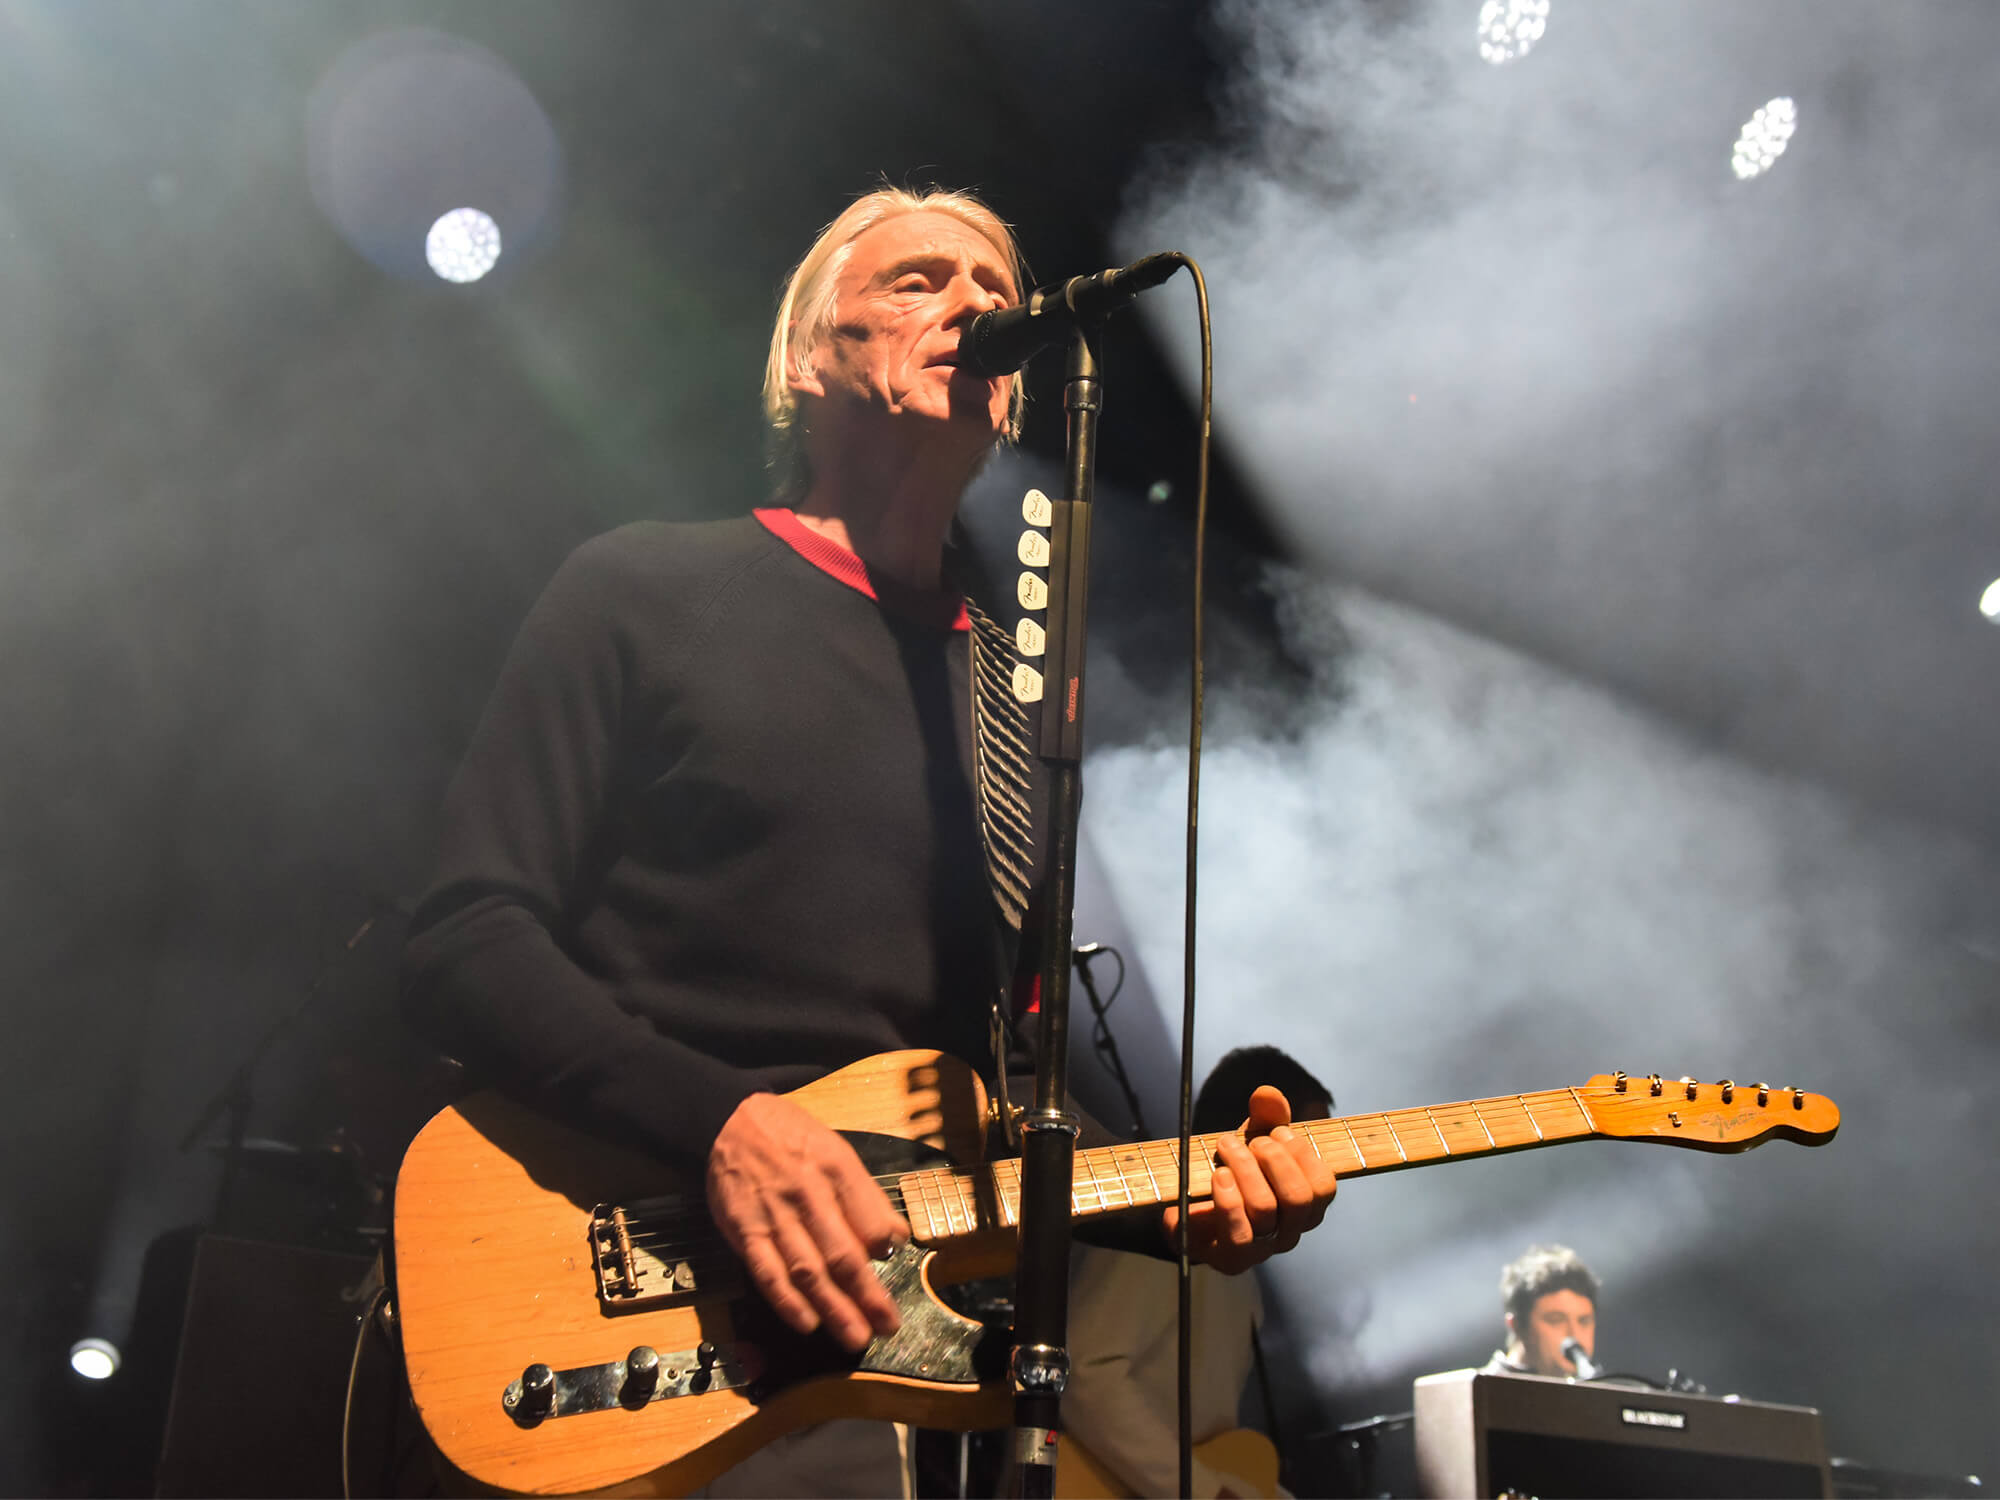 Paul Weller on stage playing a Telecaster guitar